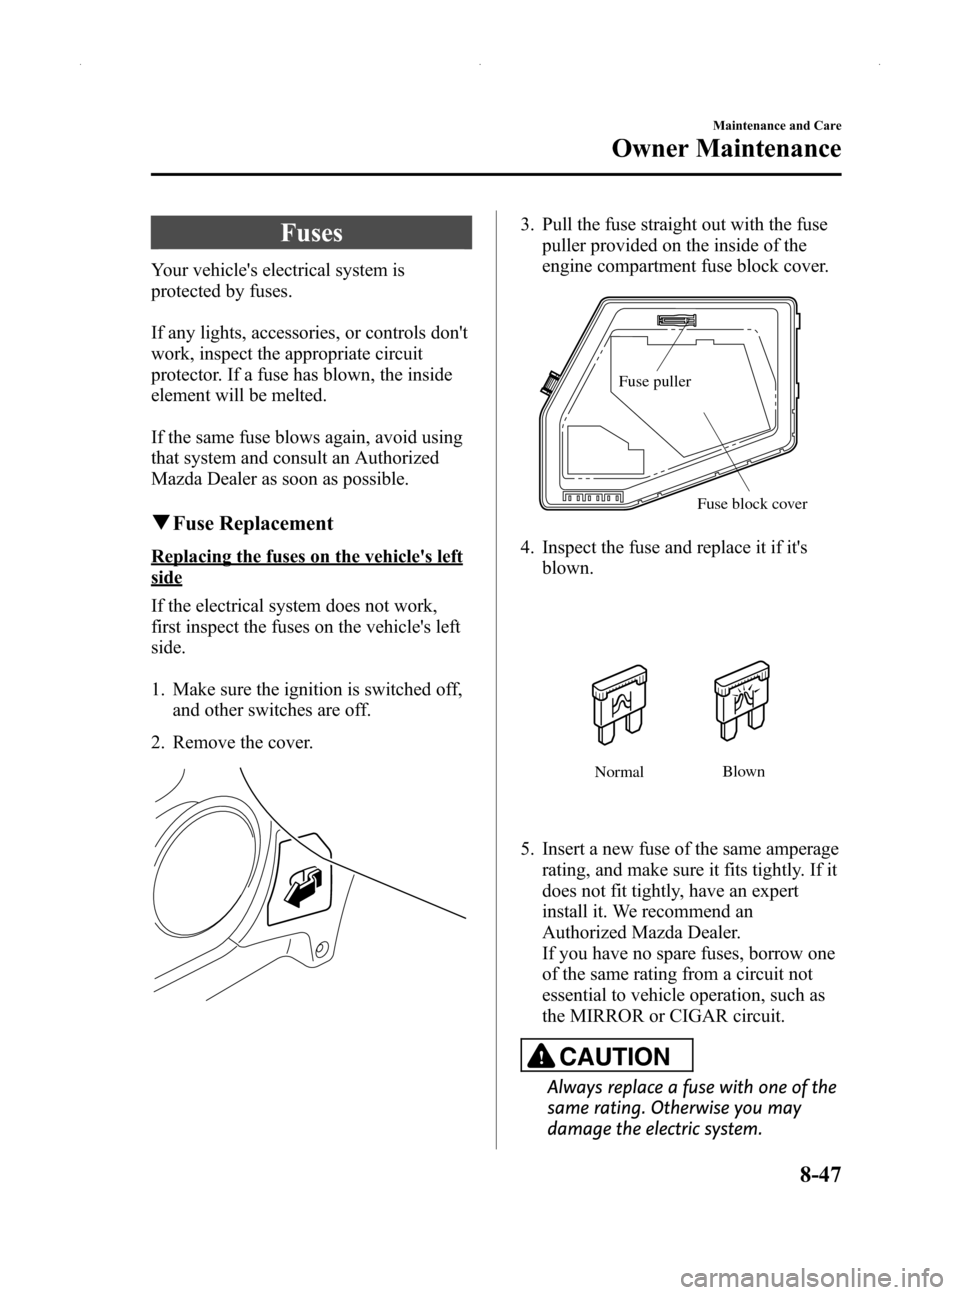 MAZDA MODEL MX-5 2014  Owners Manual (in English) Black plate (377,1)
Fuses
Your vehicles electrical system is
protected by fuses.
If any lights, accessories, or controls dont
work, inspect the appropriate circuit
protector. If a fuse has blown, th